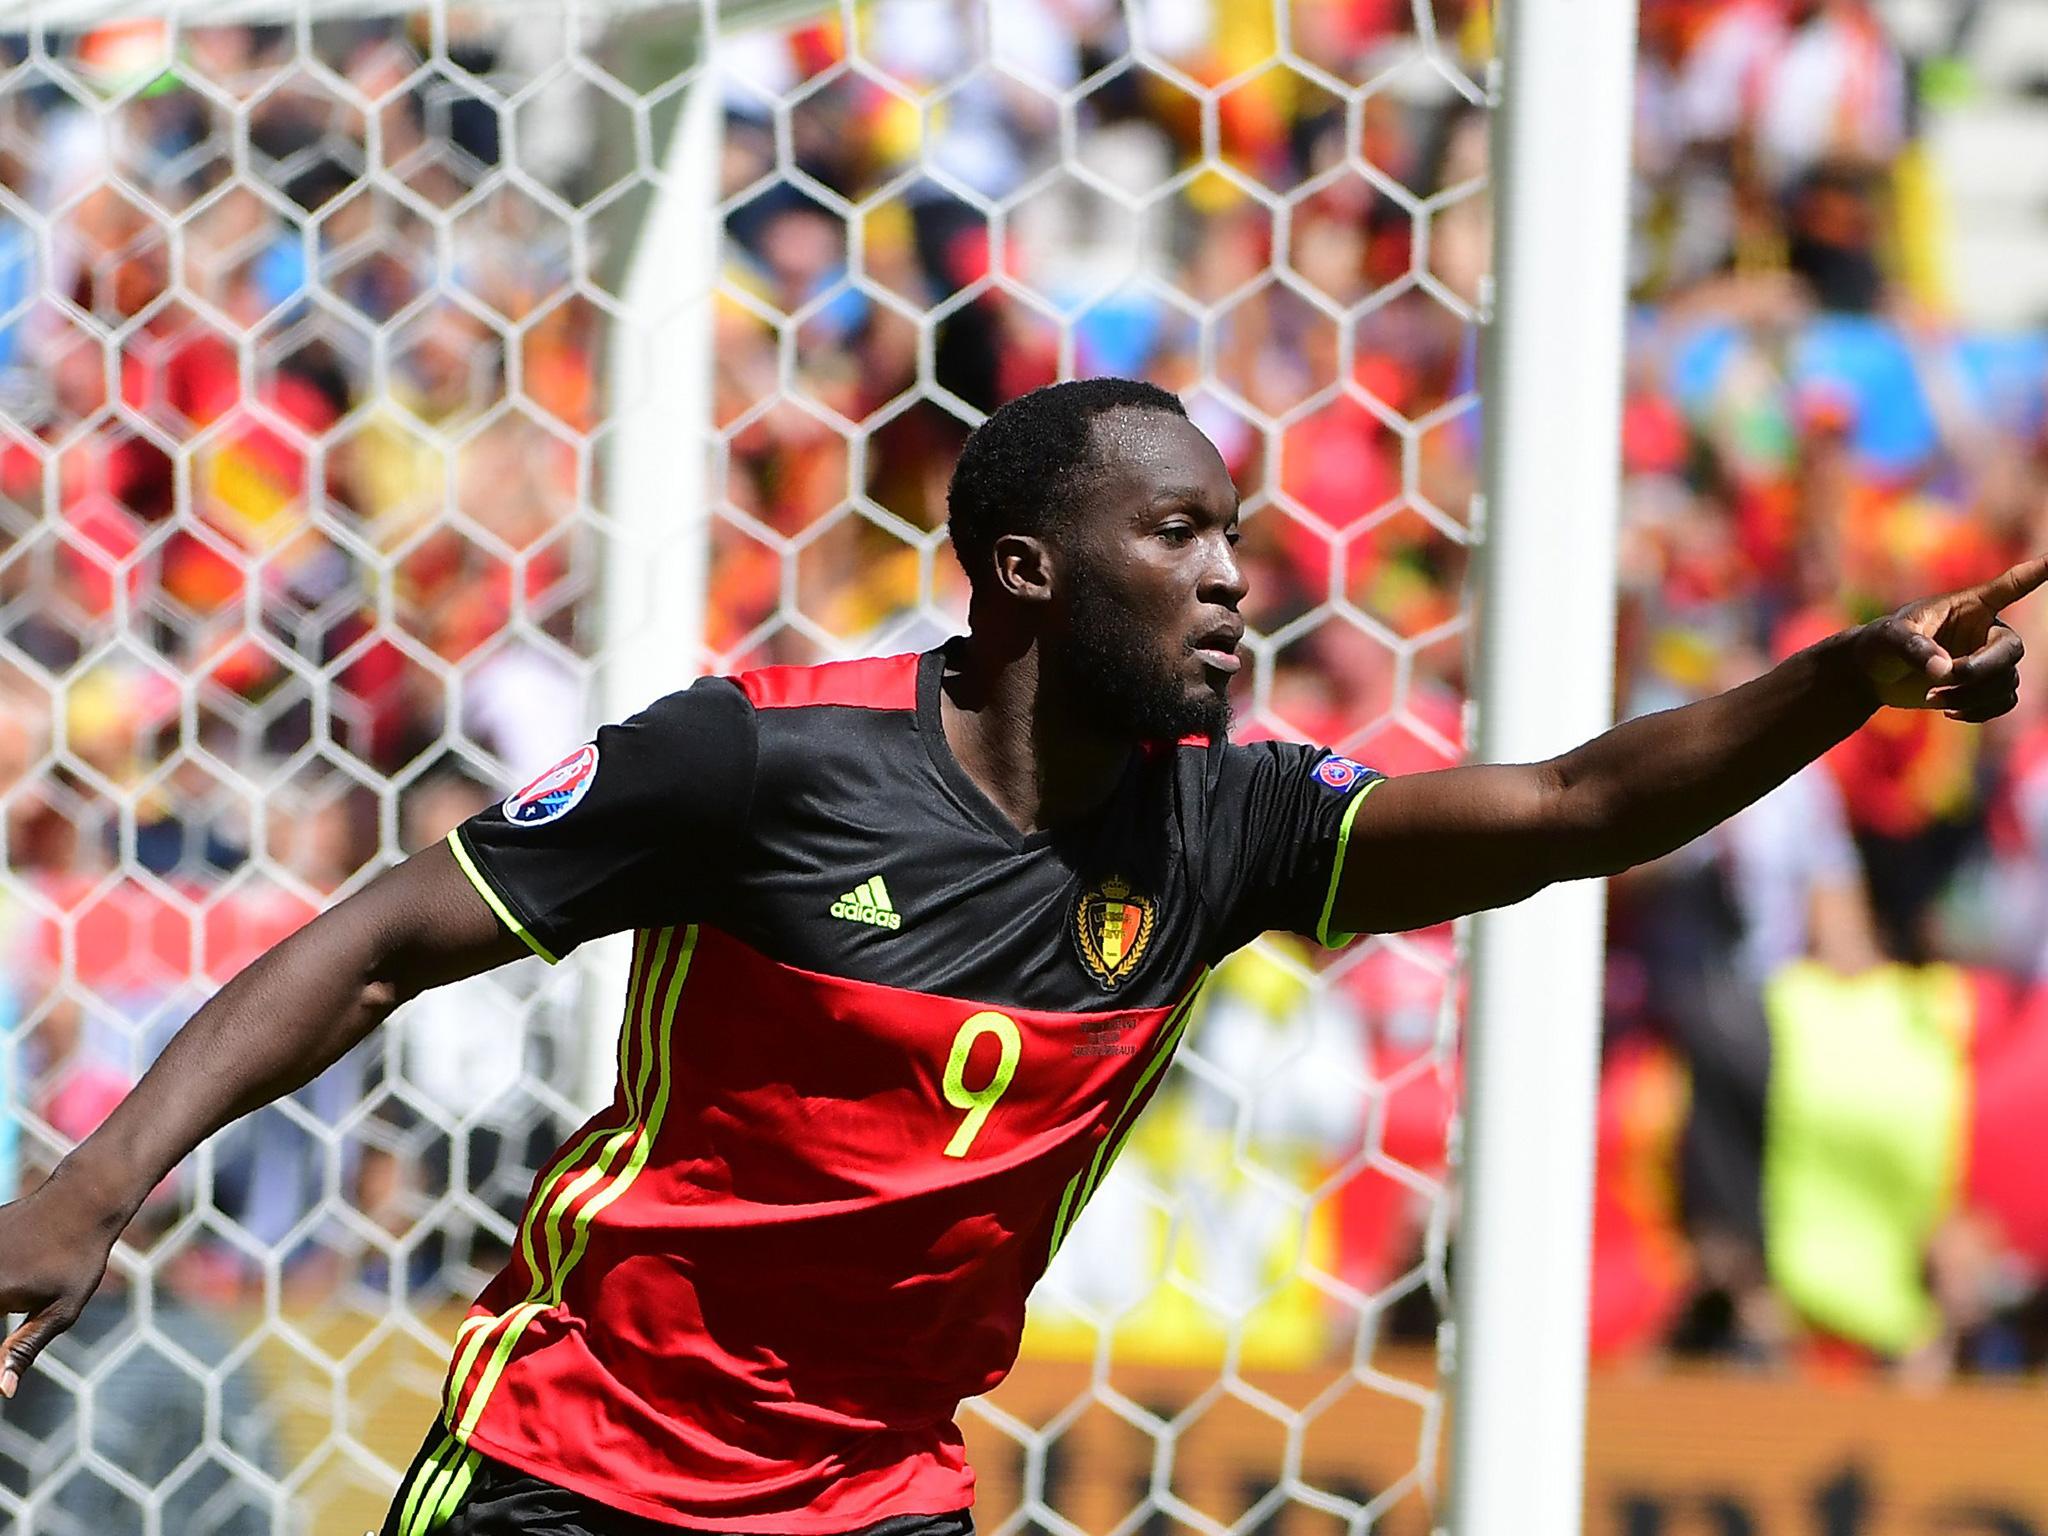 Lukaku is currently competing at the European Championship with Belgium